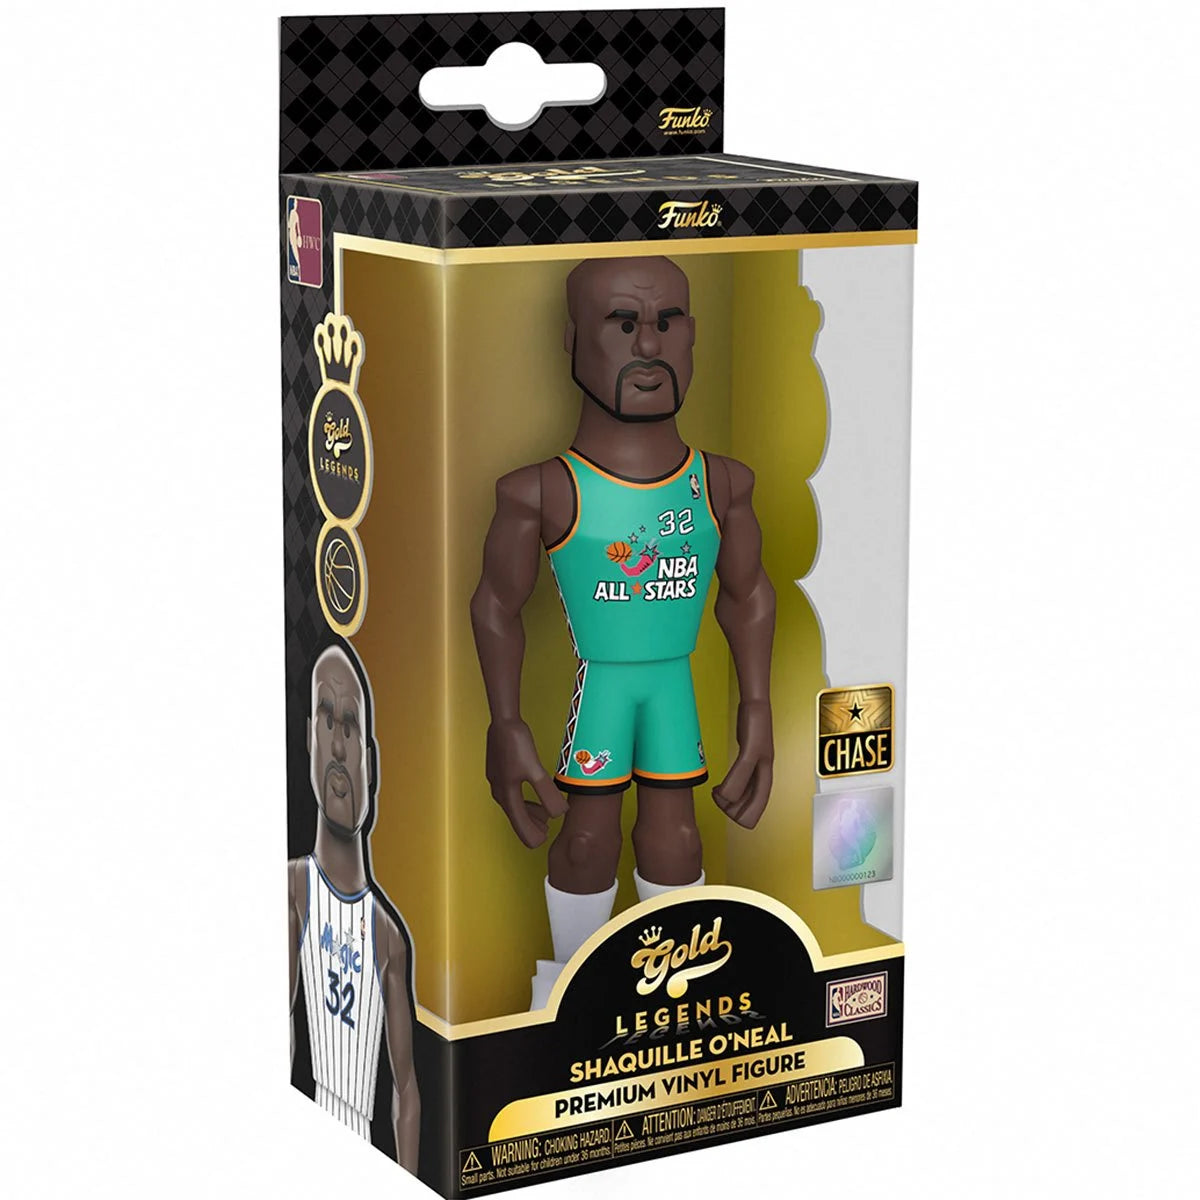 Shaquille O'Neal Magic NBA Legends  5-Inch Funko Vinyl Gold Figure w/ Chance of chase!